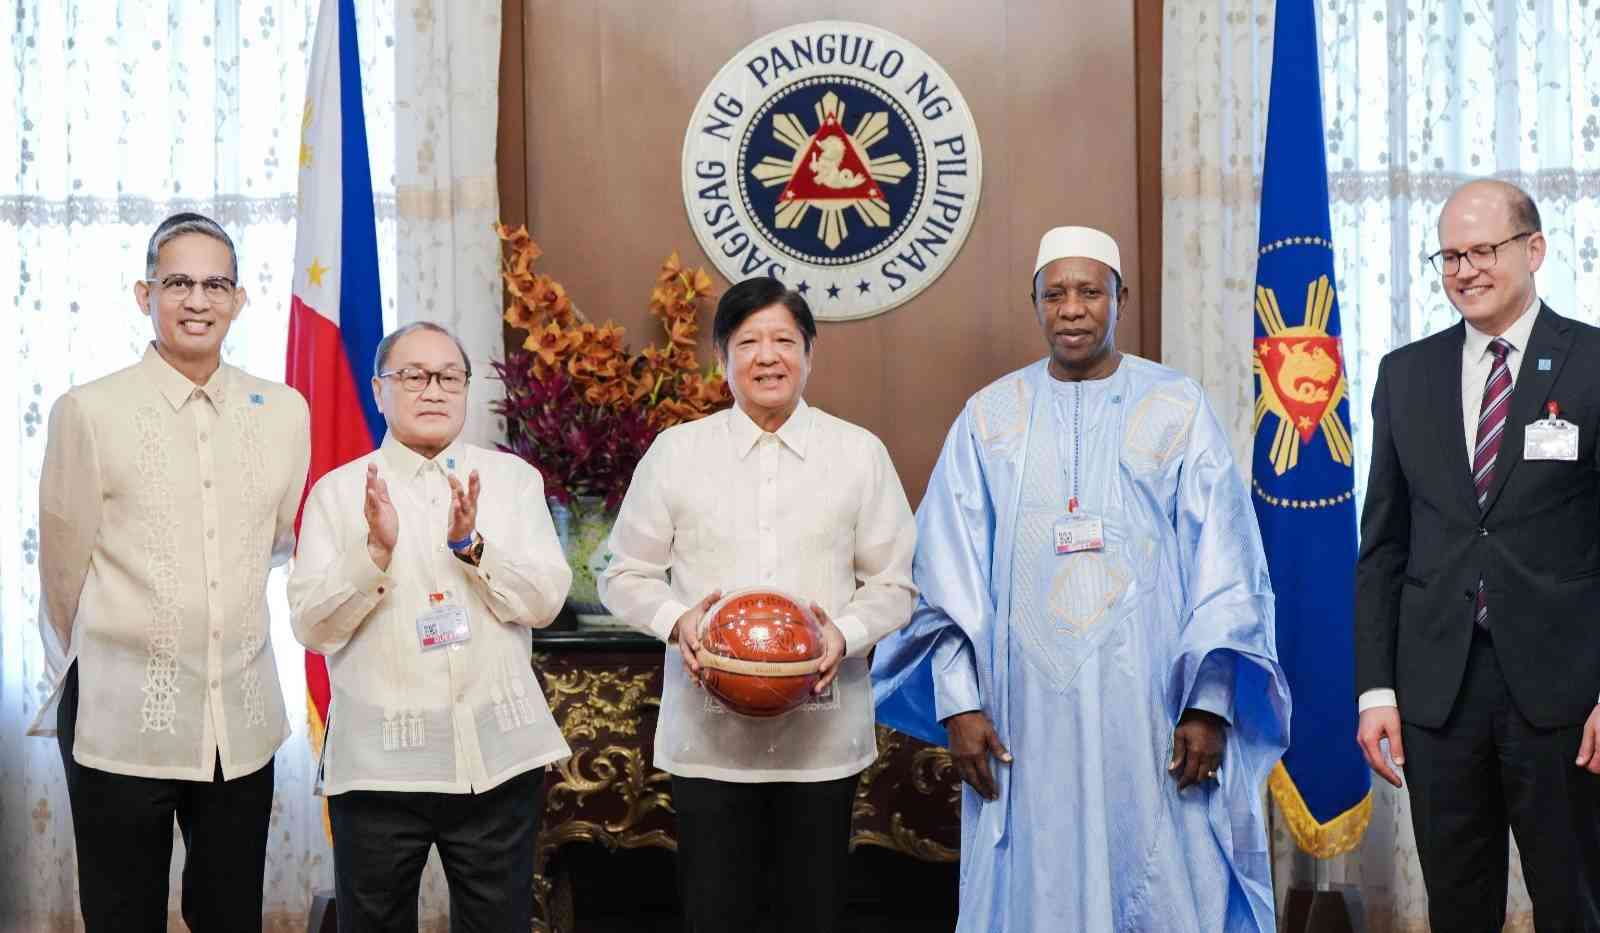 PBBM to make ball toss in 2023 FIBA World Cup opening